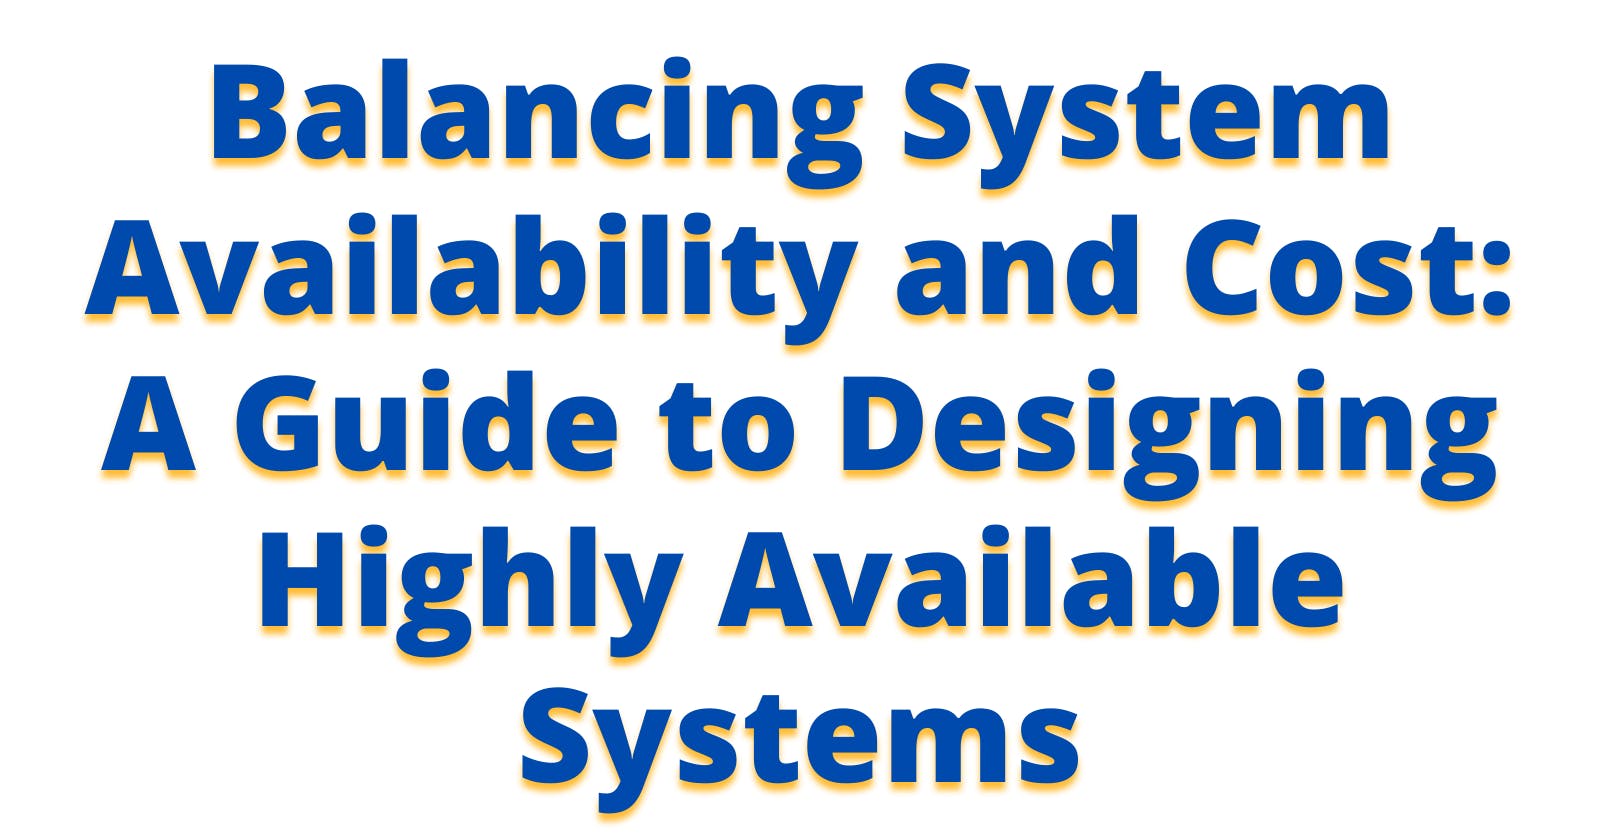 Balancing System Availability and Cost: A Guide to Designing Highly Available Systems